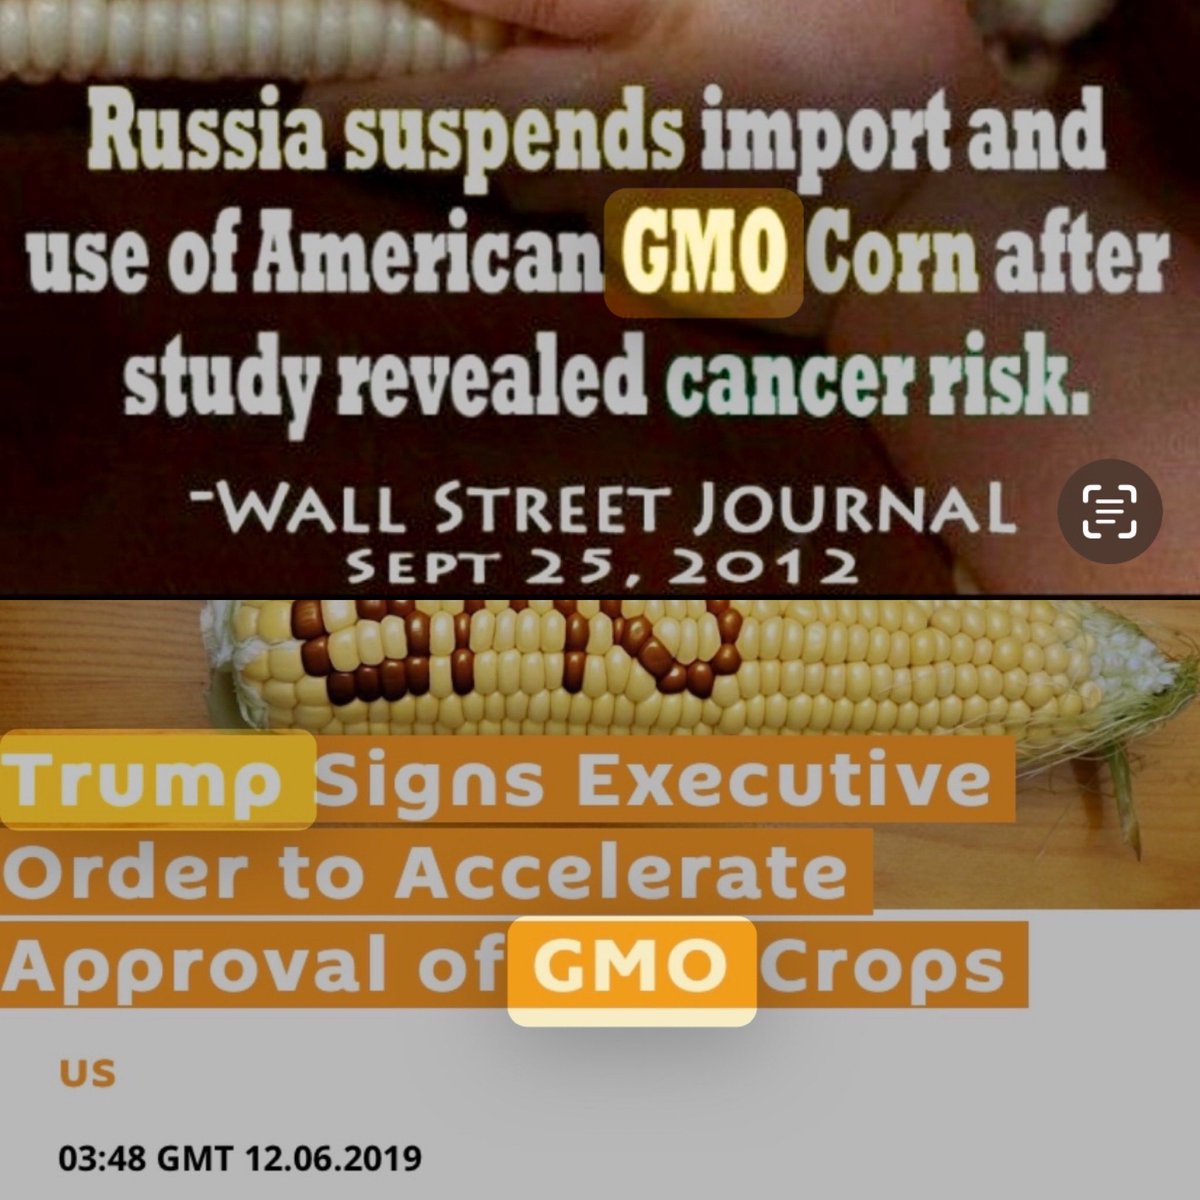 WE ARE THE ONLY NATION IN THE WORLD 

THAT POISONS ITS OWN PEOPLE
AND THE PEOPLE STILL LOVE THEIR GOVERNMENT 

STOCKHOLM SYNDROME 🧨
Wake up !!! They aren’t working for you! Trumpy included ~ hes an Illuminati puppet #WakeUpAmerica